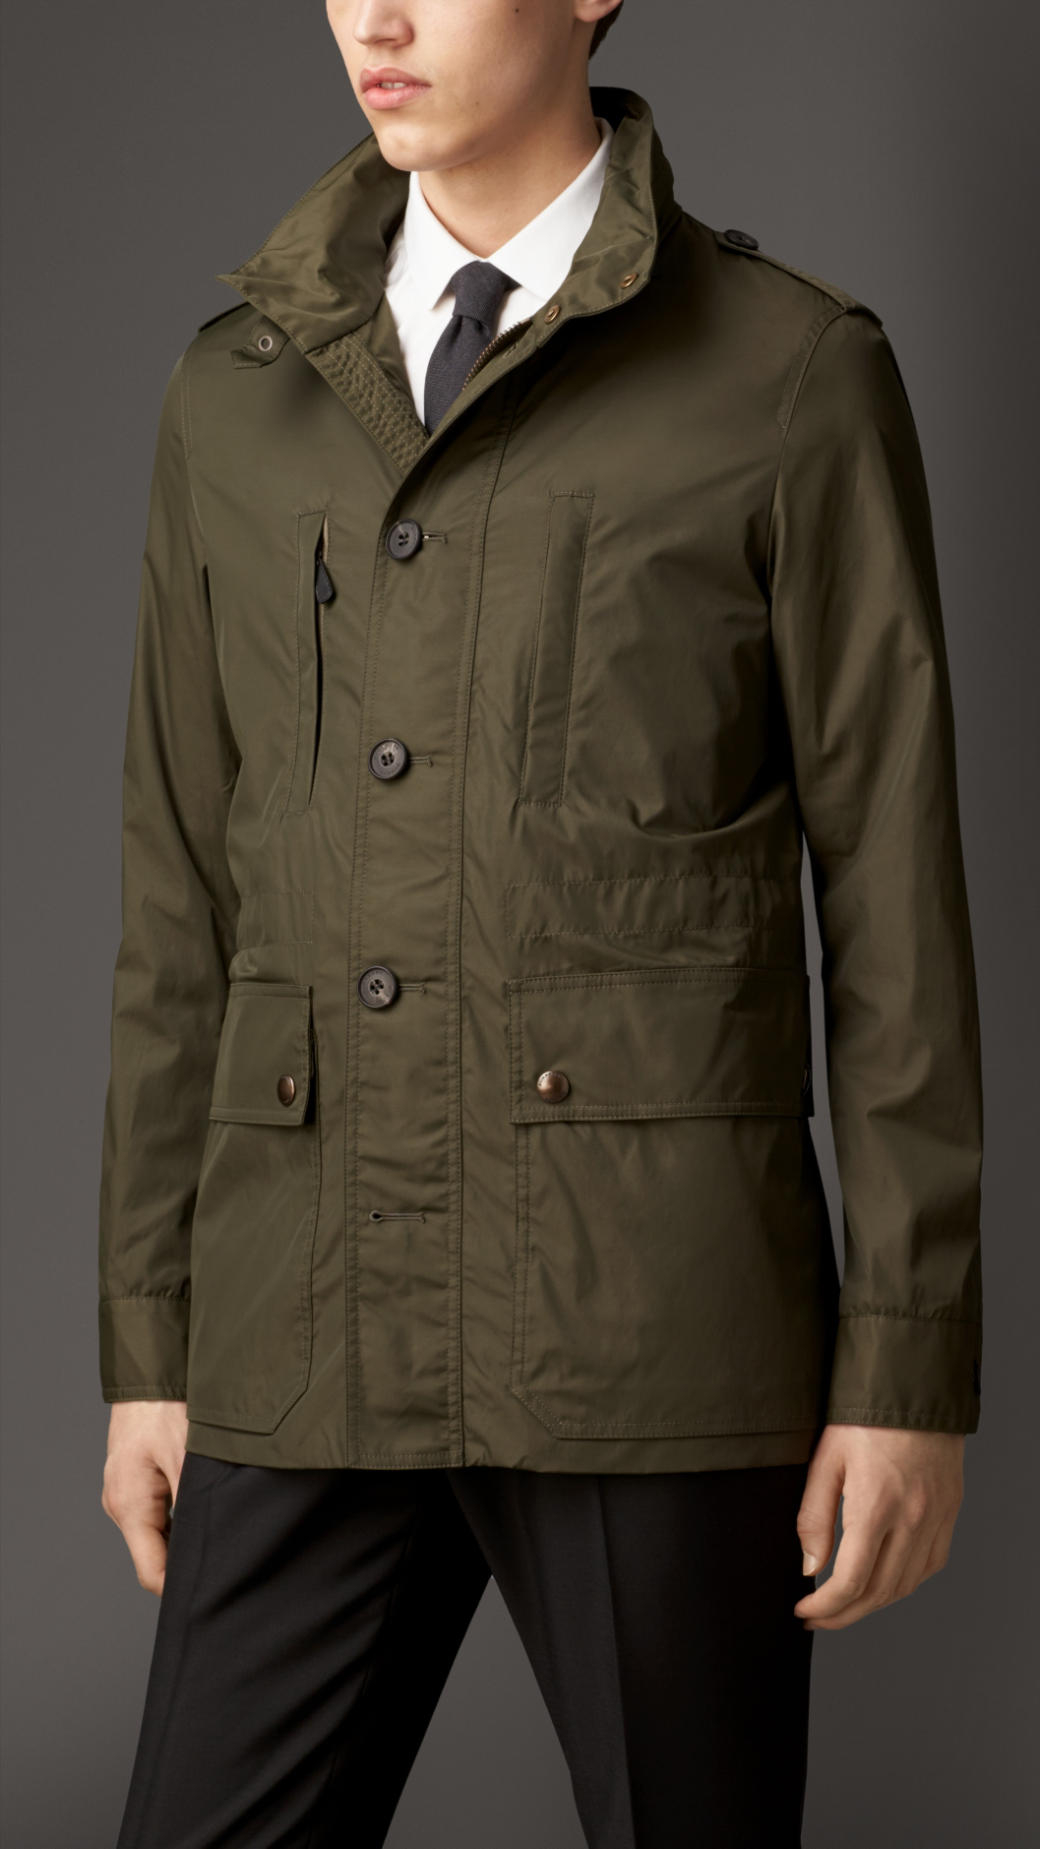 Lyst - Burberry Technical Cotton Field Jacket in Green for Men